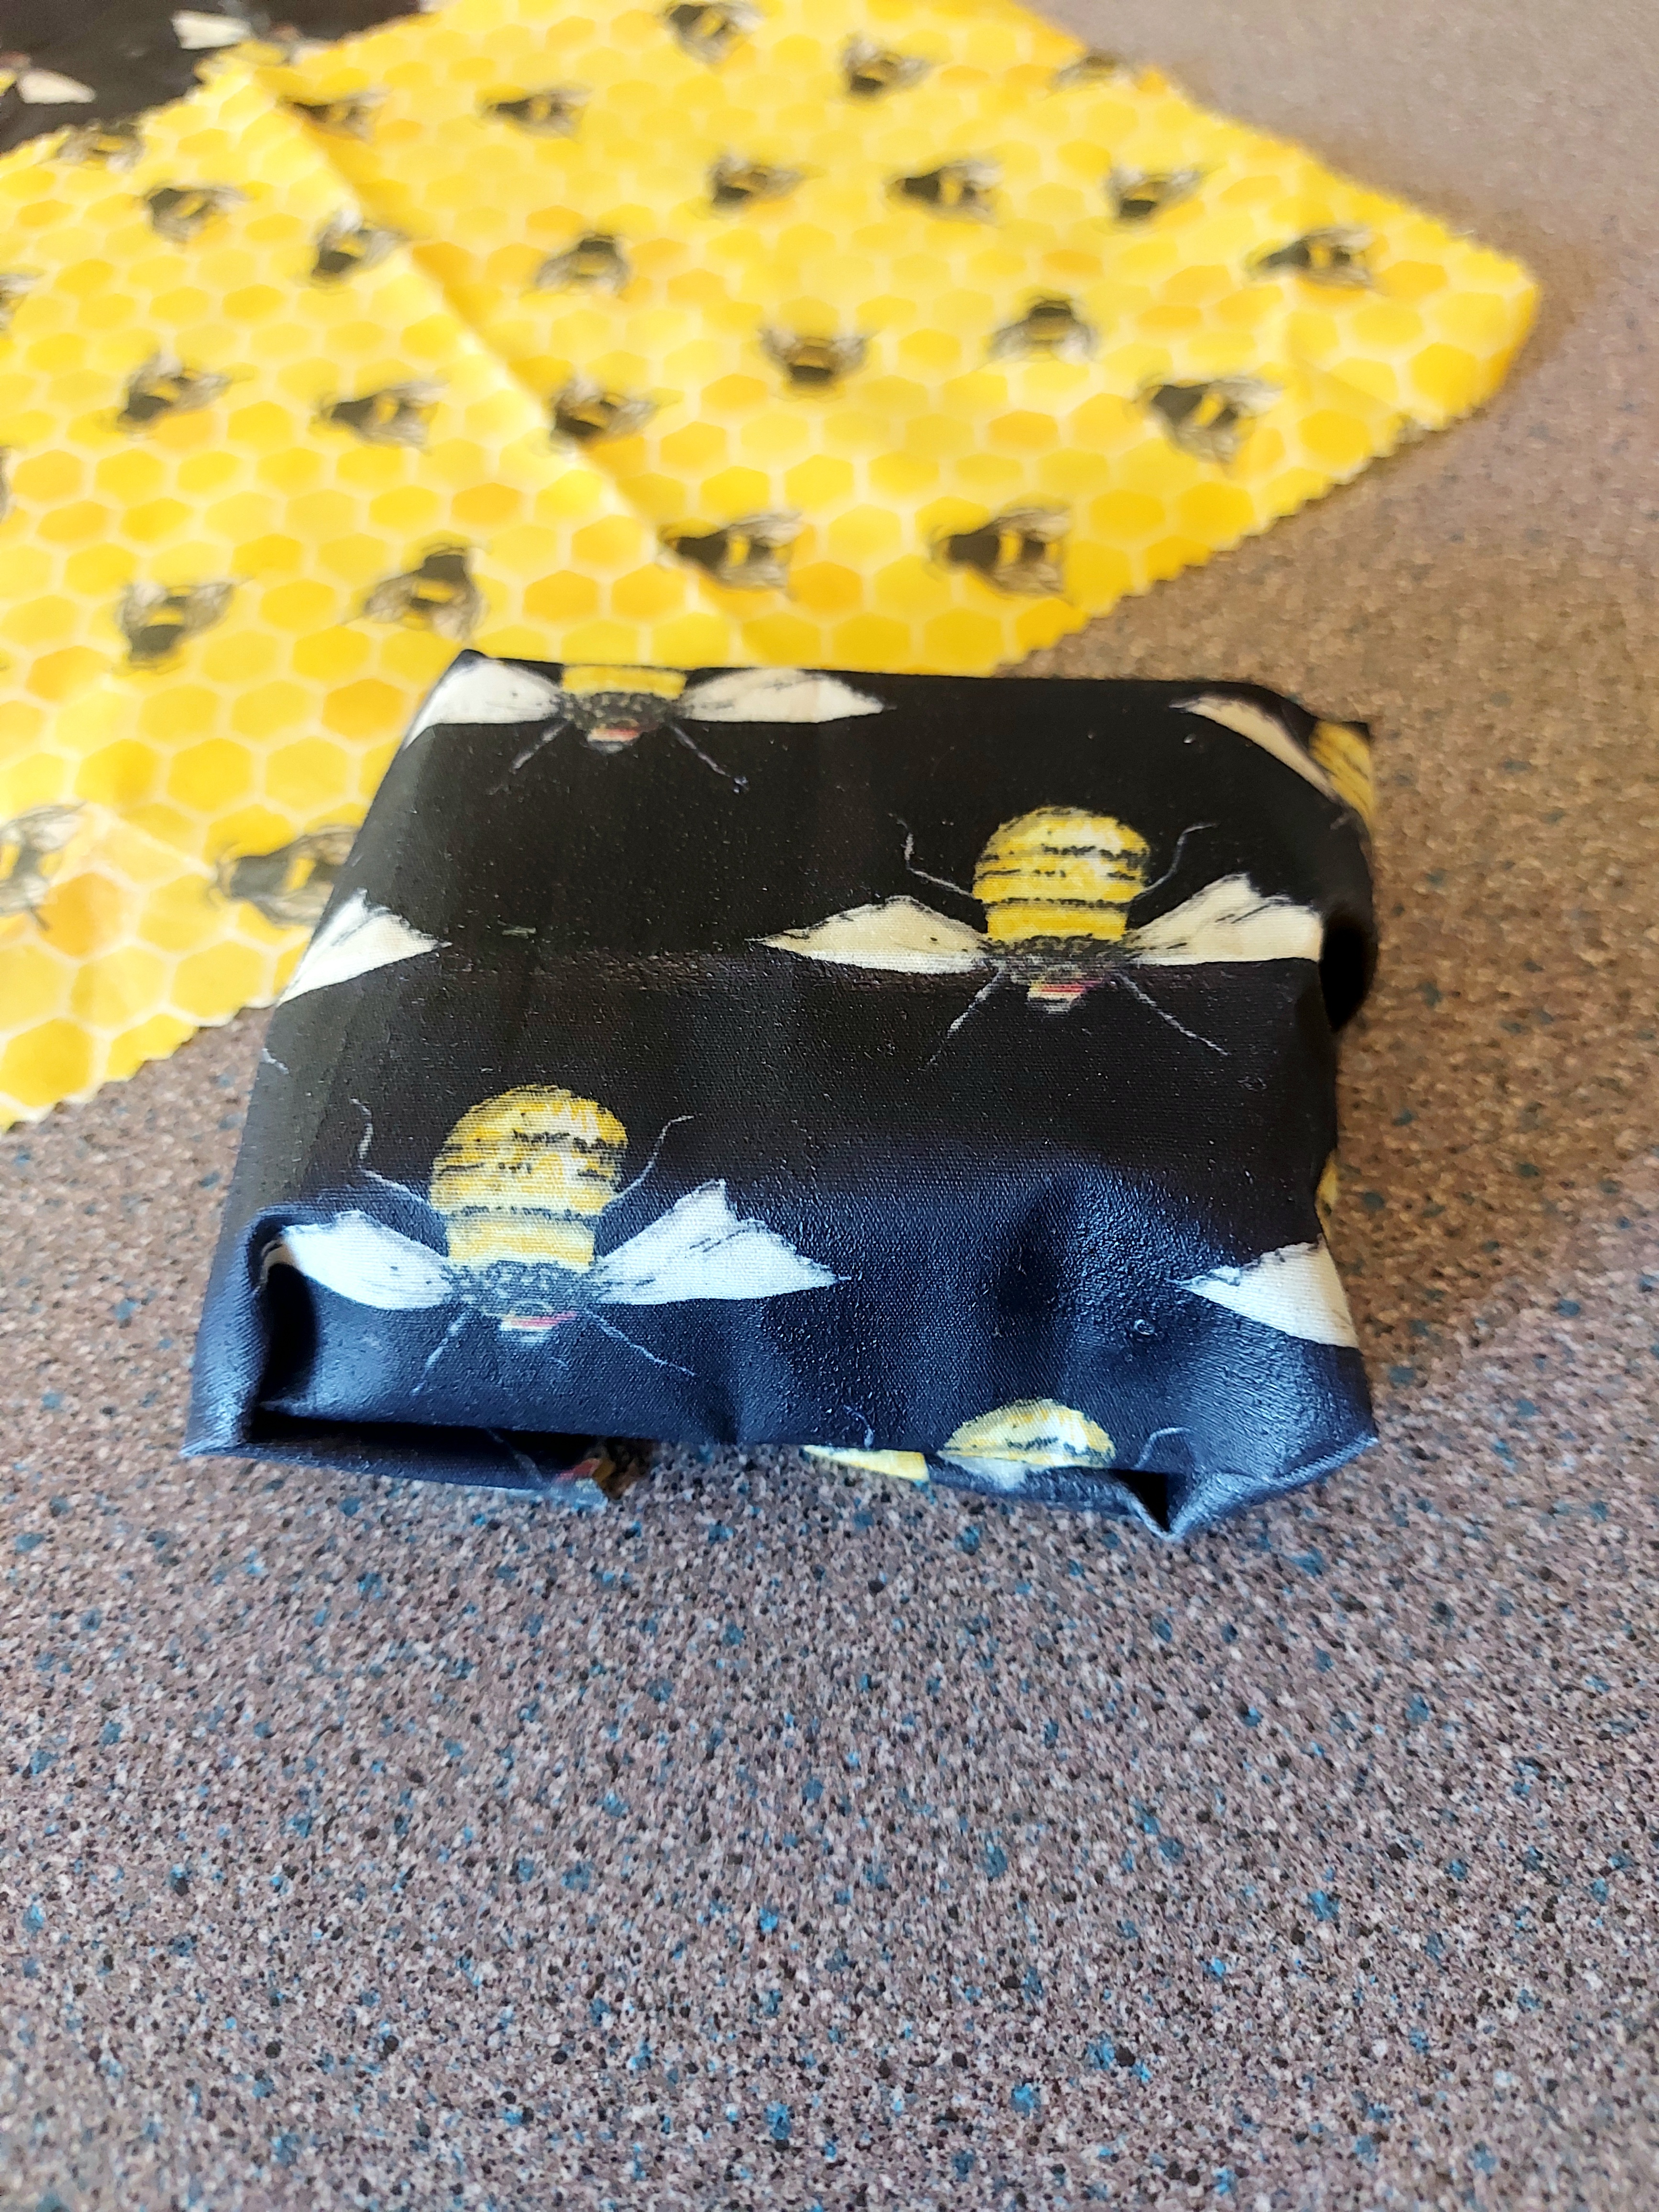 a dark blue beeswax wrap wrapping a rectangular piece of cake